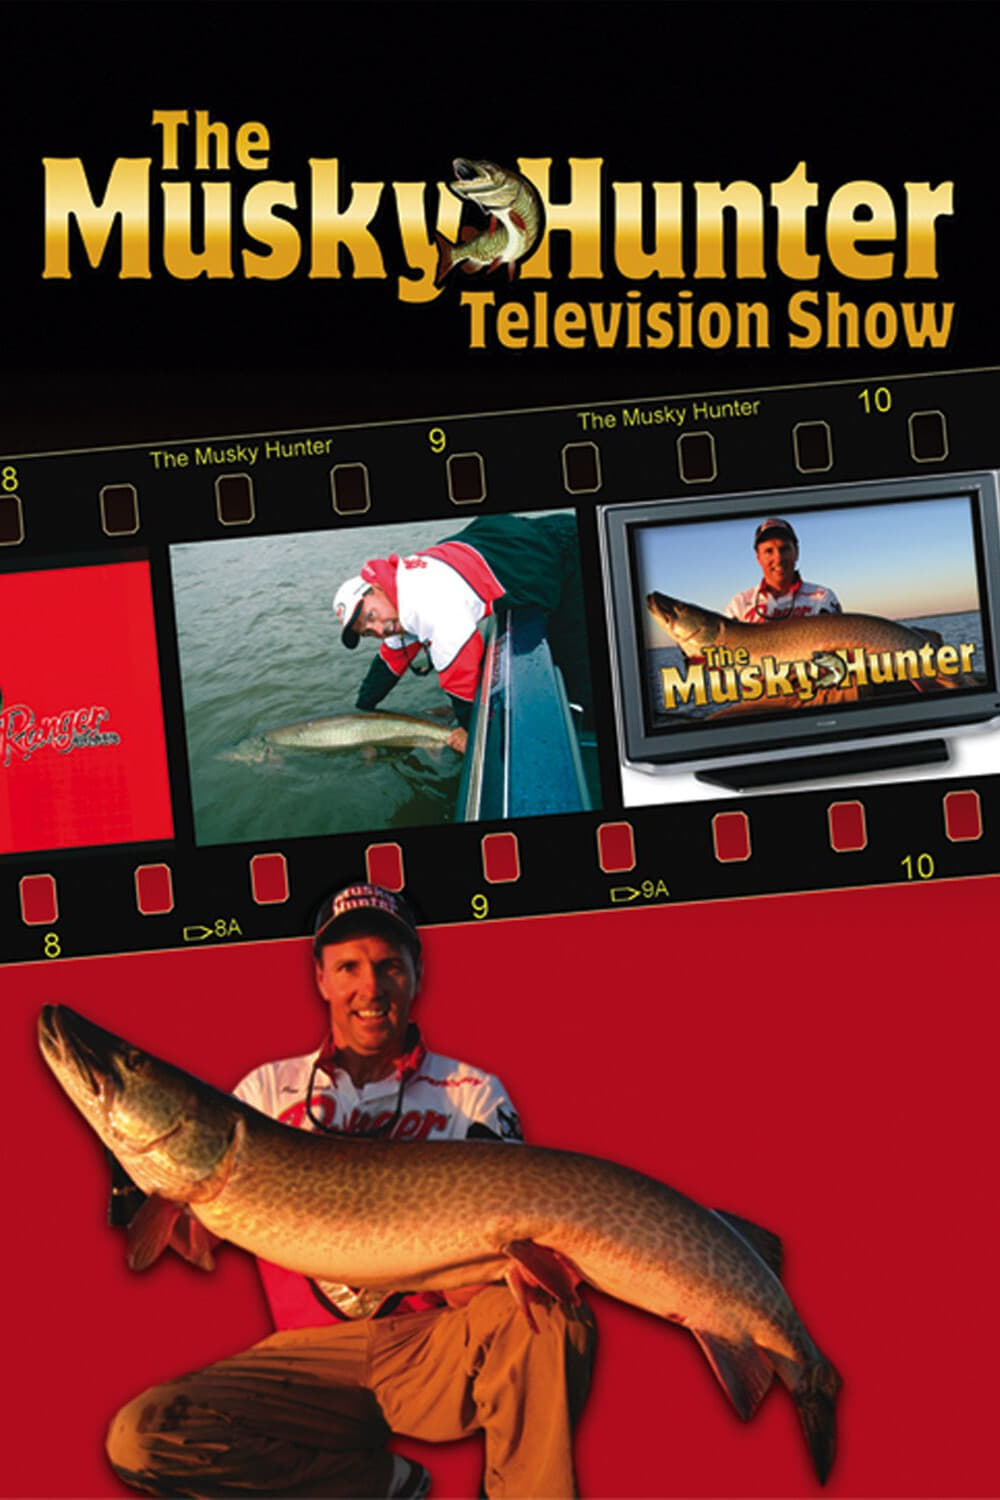 The Musky Hunter Television Show